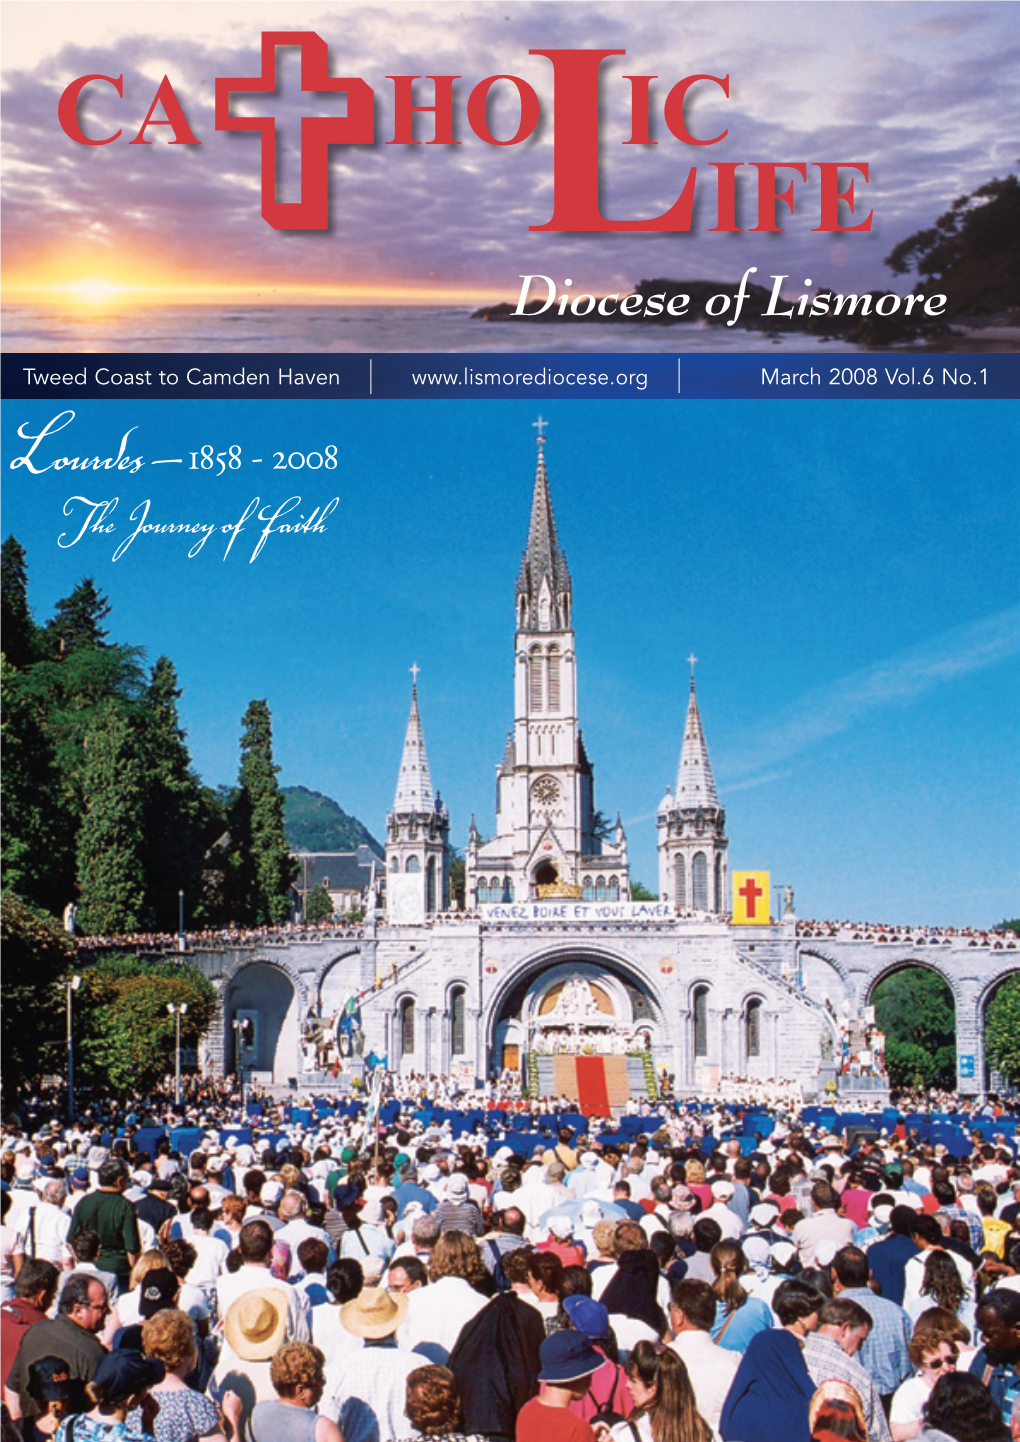 March 2008 Vol.6 No.1 Lourdes – 1858 - 2008 the Journey of Faith the Bishop Jarrett Writes with Mind and Heart Renewed